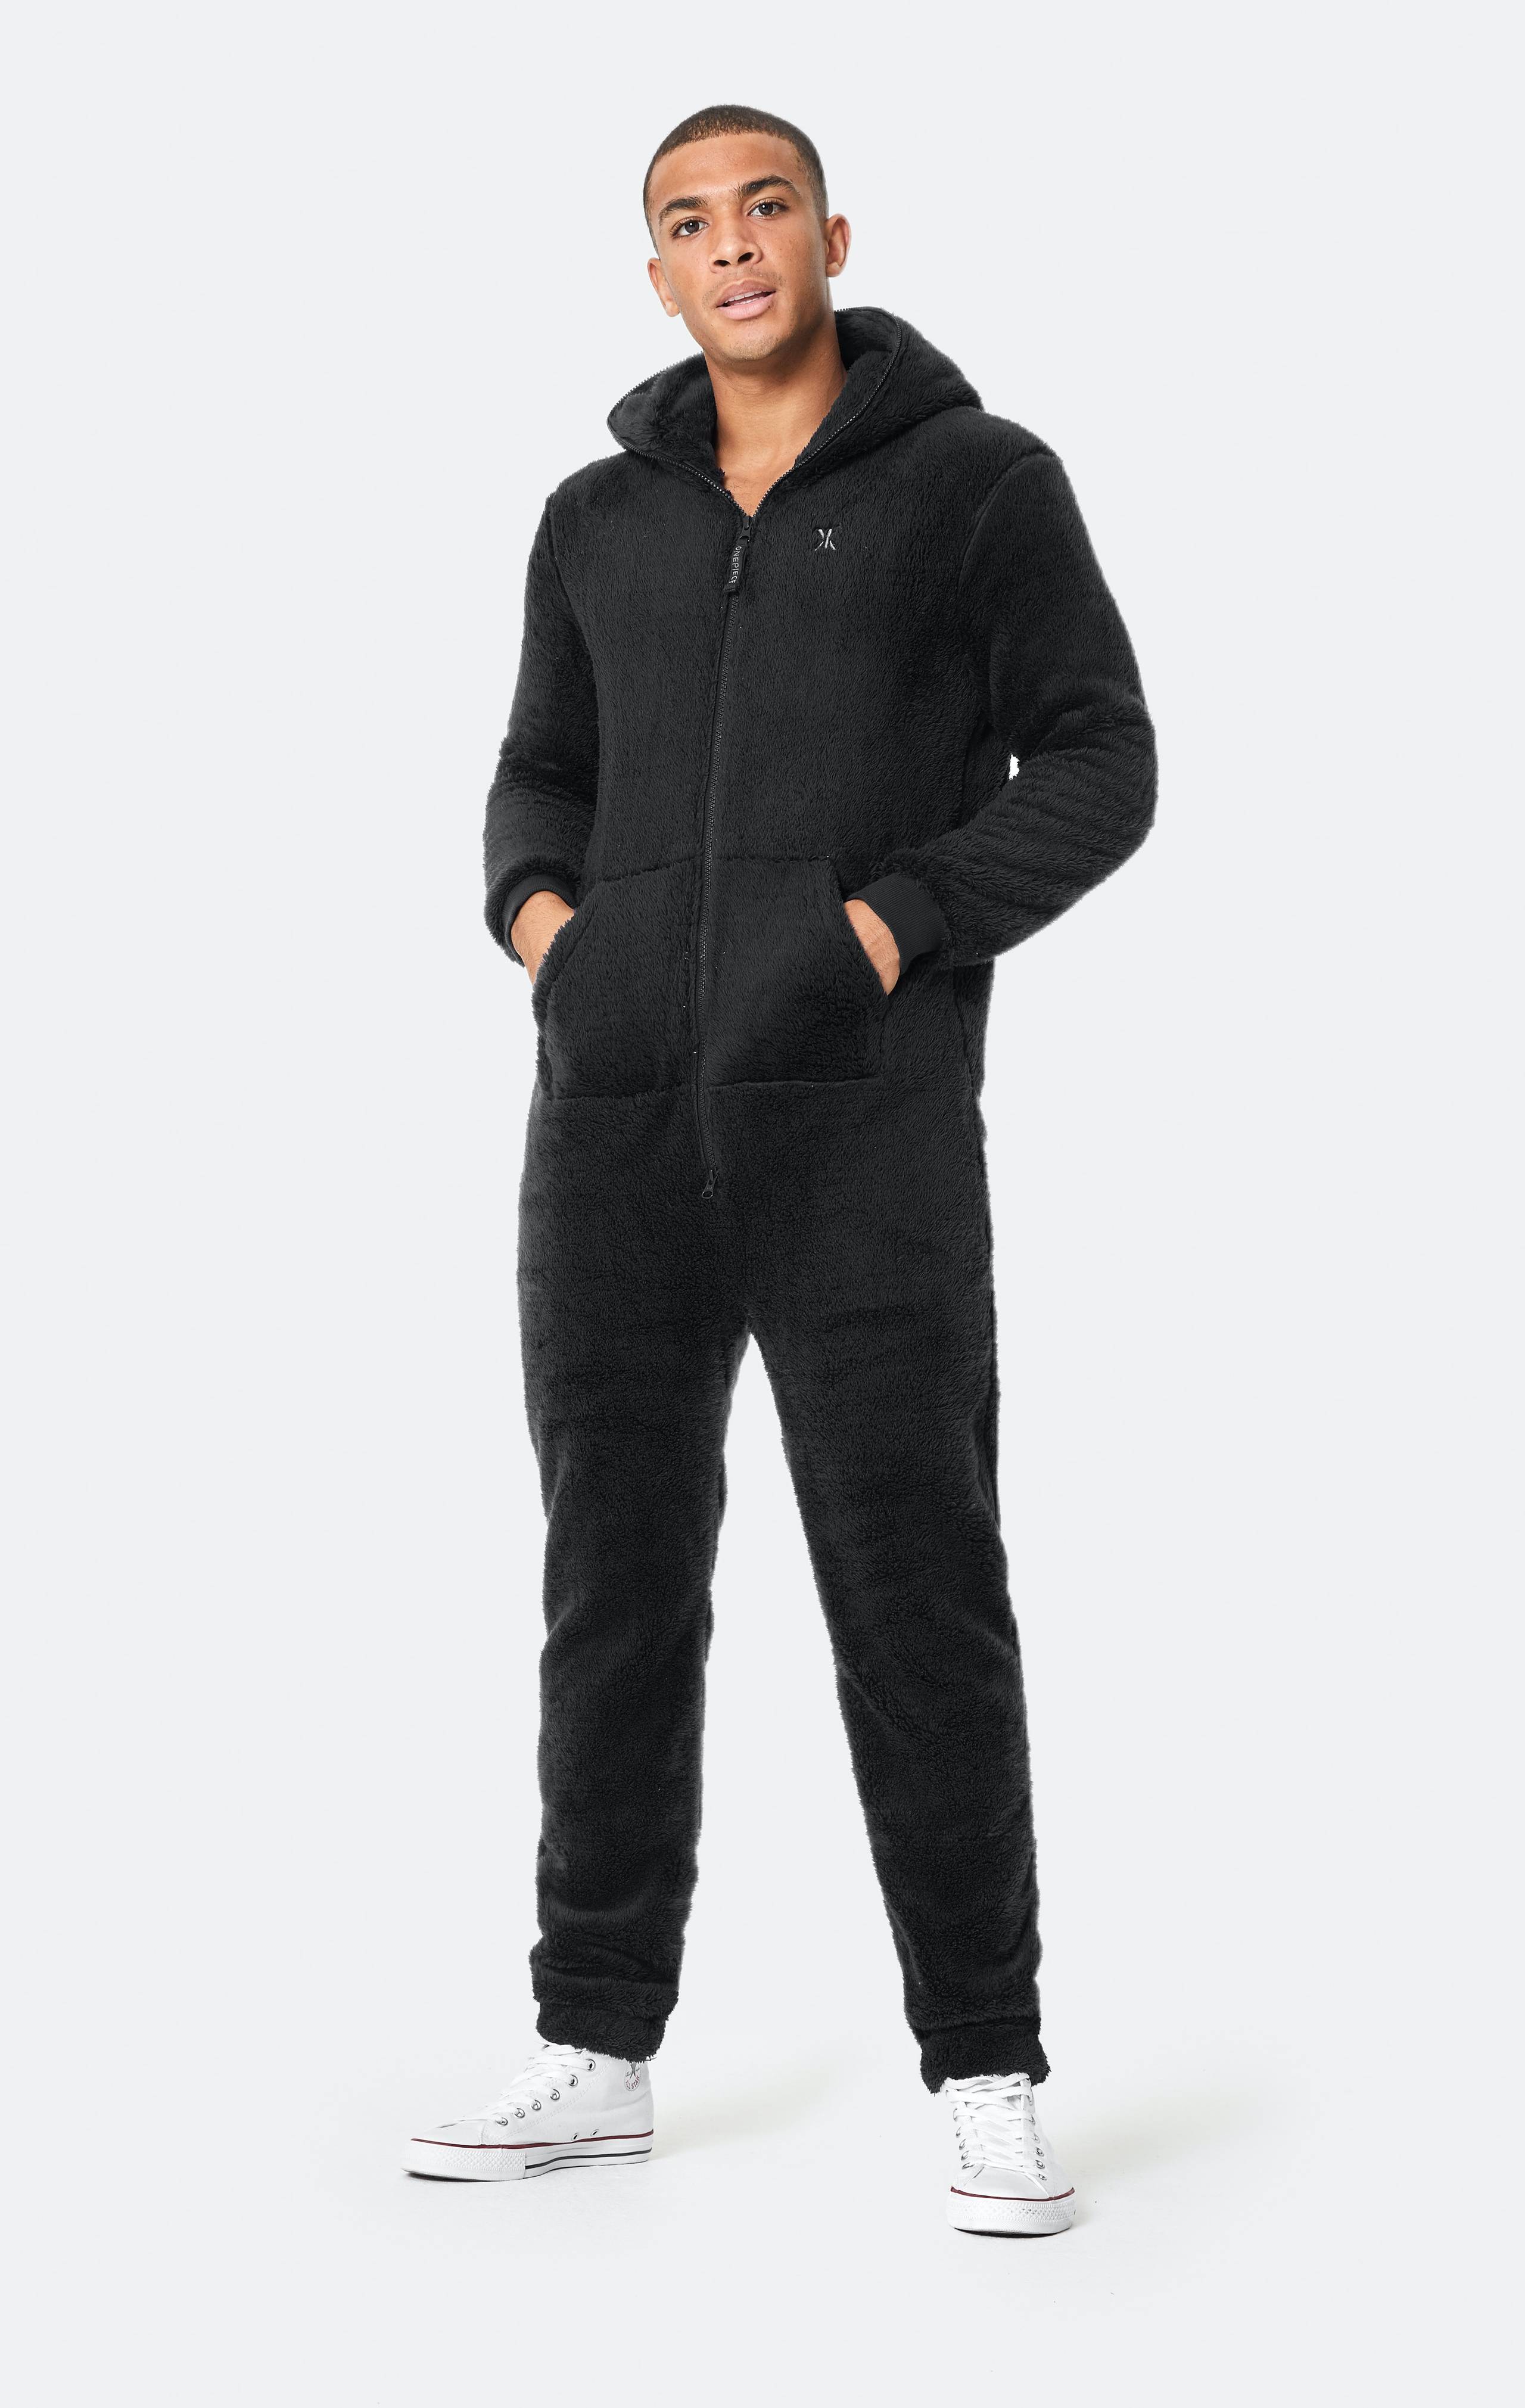 Onepiece The New Puppy Jumpsuit Black - 4